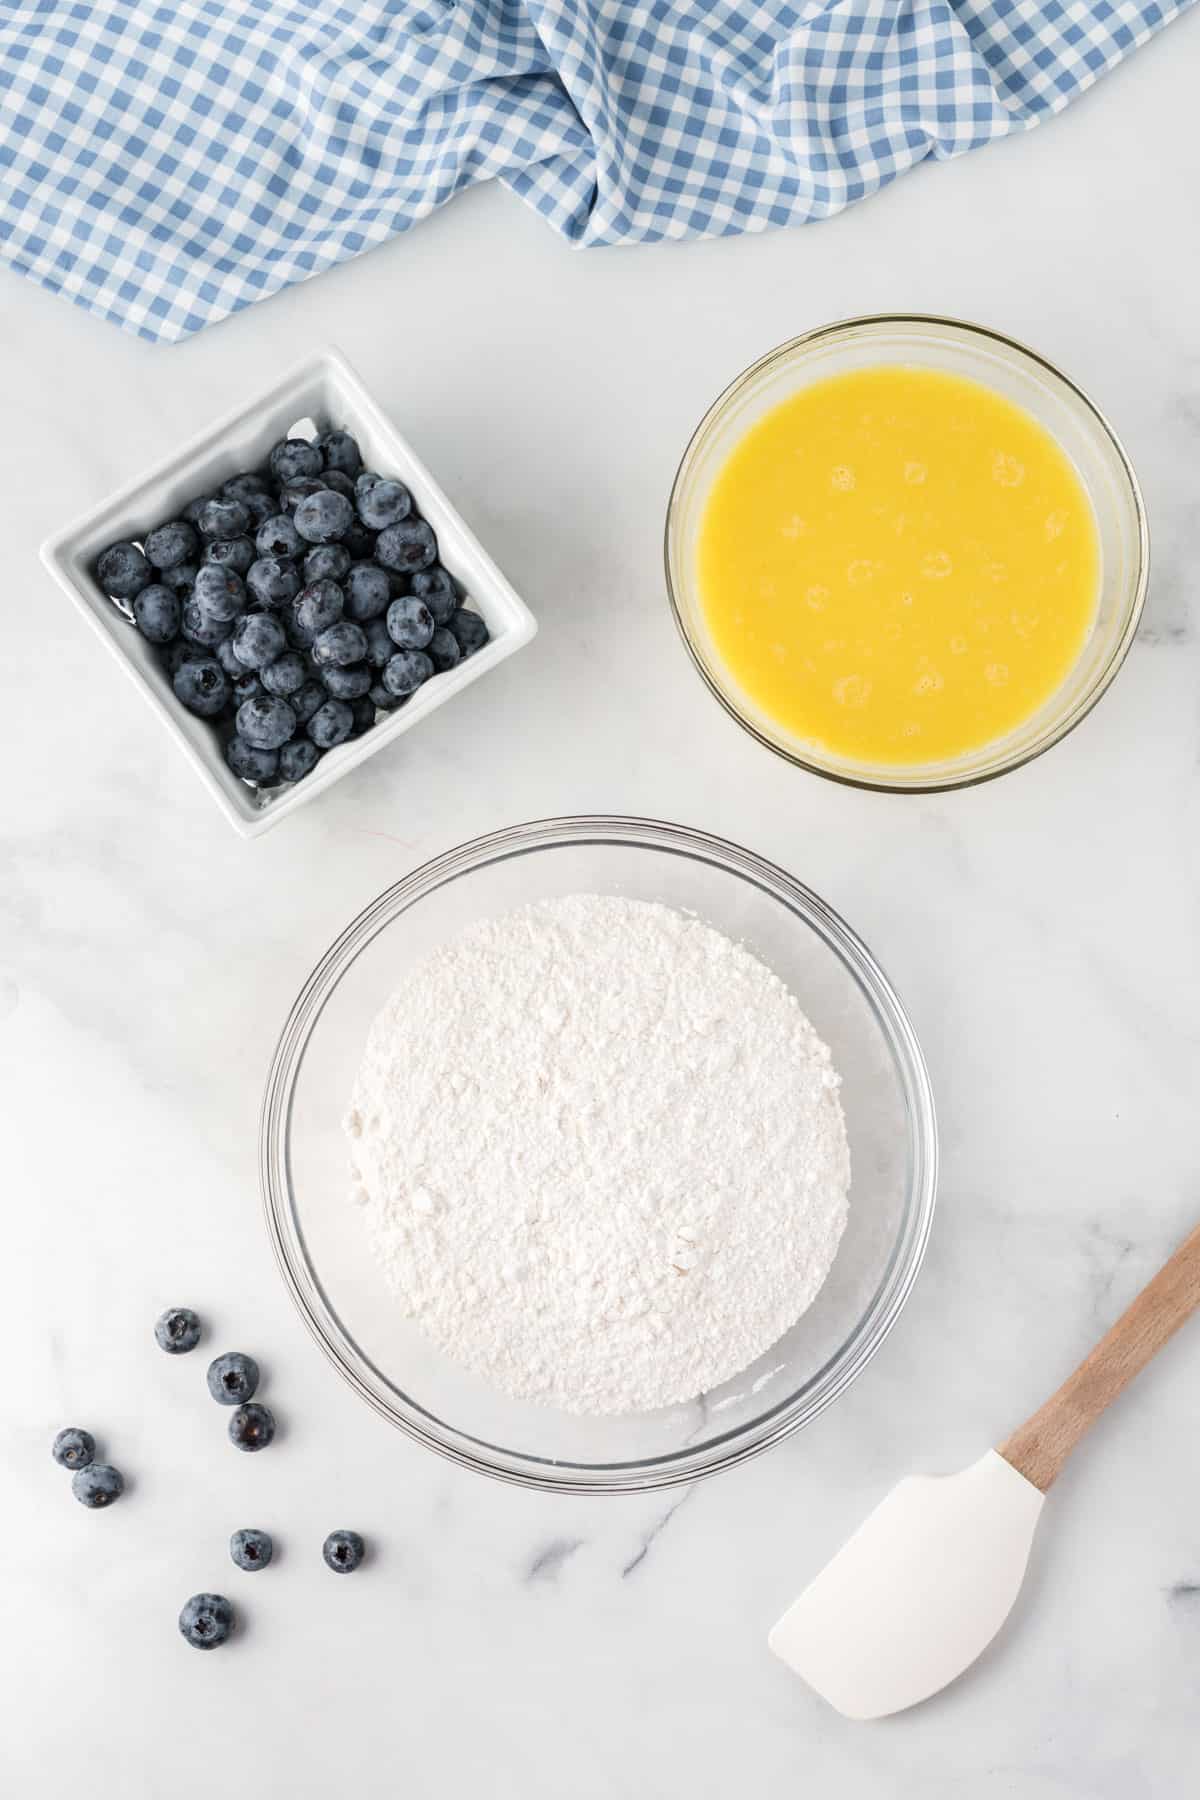 cake mix, wet ingredients, and fresh blueberries